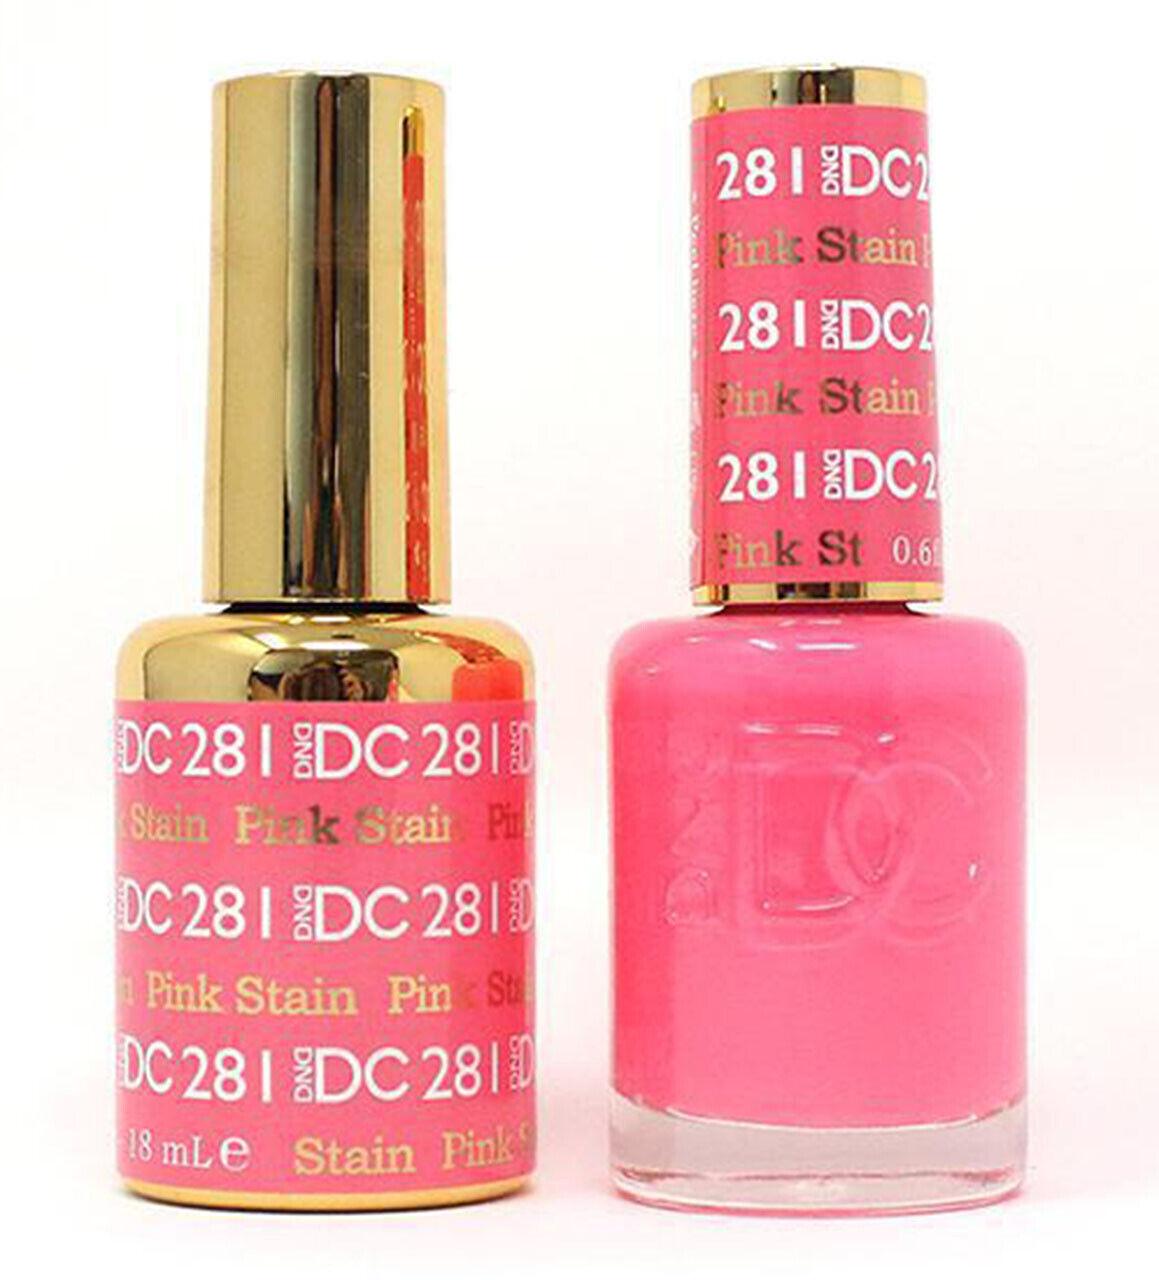 DND DC - Gel Polish & Matching Nail Lacquer Set - #281 PINK STAIN